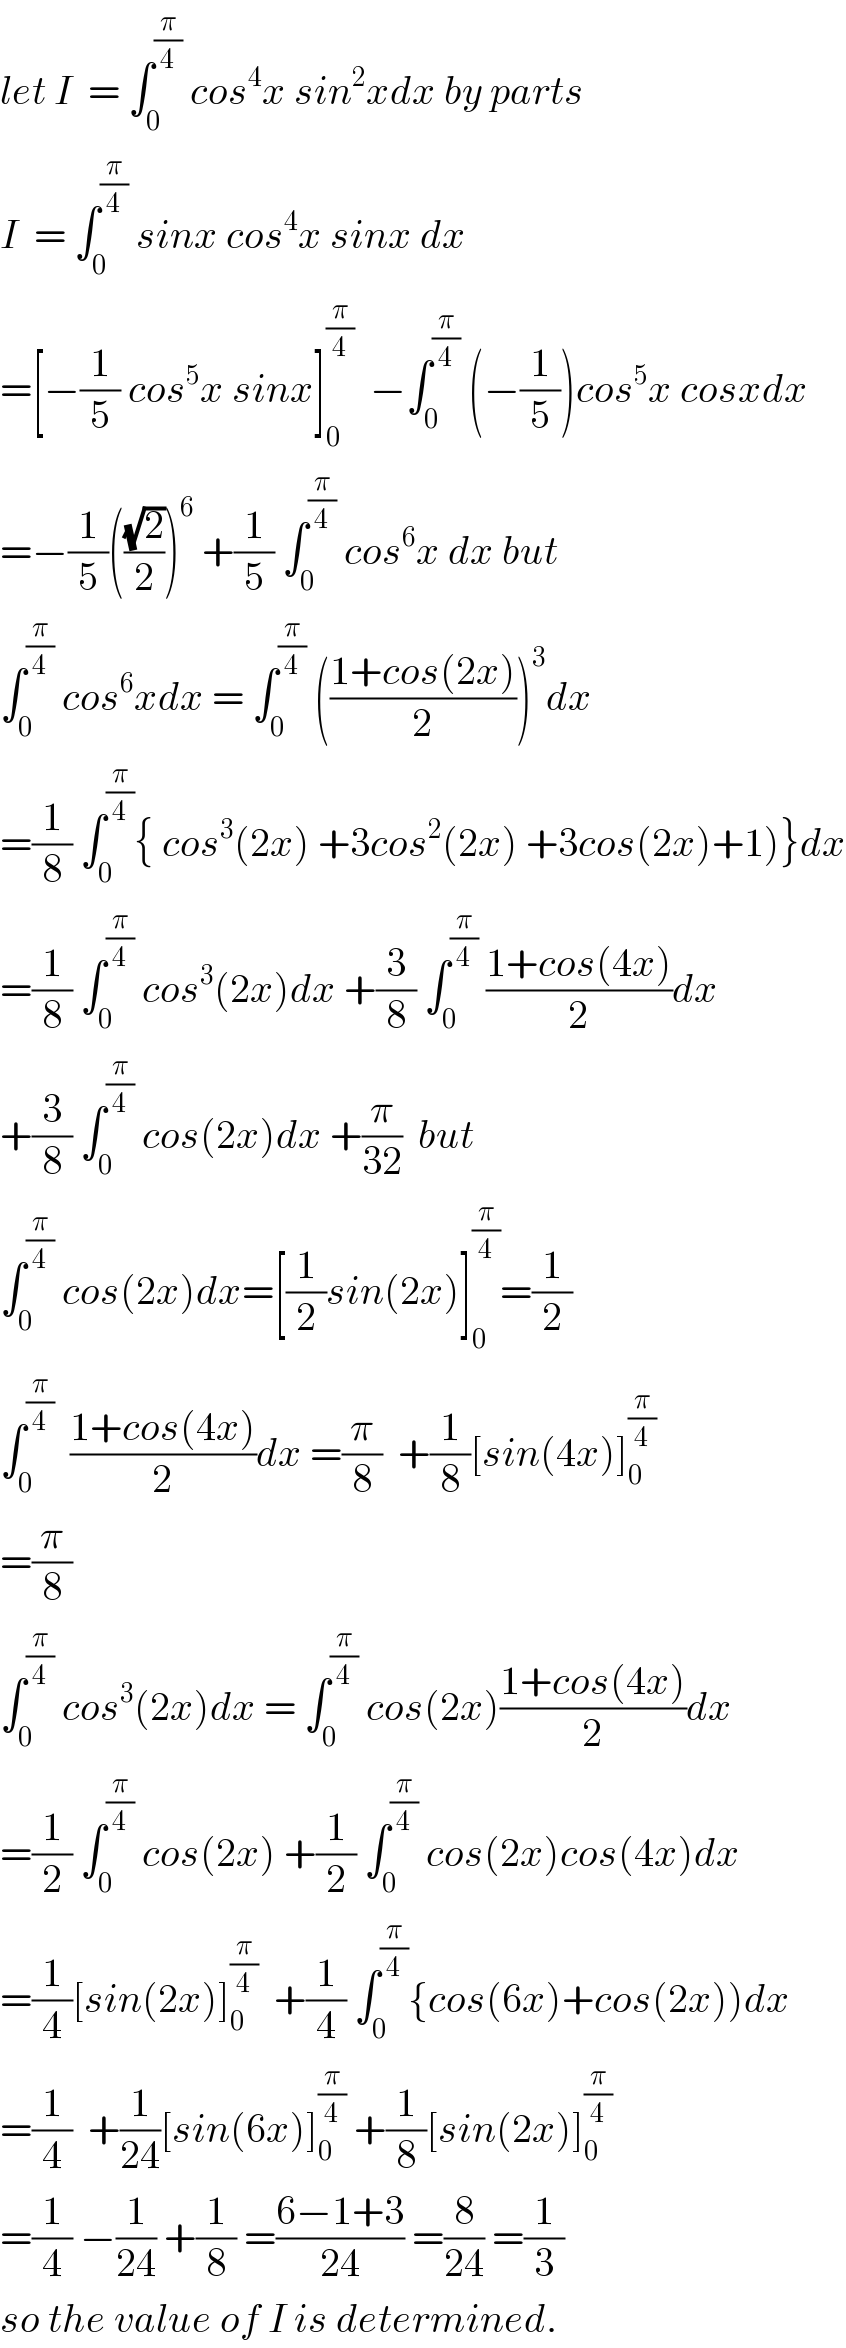 let I  = ∫_0 ^(π/4)  cos^4 x sin^2 xdx by parts  I  = ∫_0 ^(π/4)  sinx cos^4 x sinx dx  =[−(1/5) cos^5 x sinx]_0 ^(π/4)   −∫_0 ^(π/4)  (−(1/5))cos^5 x cosxdx  =−(1/5)(((√2)/2))^6  +(1/5) ∫_0 ^(π/4)  cos^6 x dx but  ∫_0 ^(π/4)  cos^6 xdx = ∫_0 ^(π/4)  (((1+cos(2x))/2))^3 dx  =(1/8) ∫_0 ^(π/4) { cos^3 (2x) +3cos^2 (2x) +3cos(2x)+1)}dx  =(1/8) ∫_0 ^(π/4)  cos^3 (2x)dx +(3/8) ∫_0 ^(π/4)  ((1+cos(4x))/2)dx  +(3/8) ∫_0 ^(π/4)  cos(2x)dx +(π/(32))  but  ∫_0 ^(π/4)  cos(2x)dx=[(1/2)sin(2x)]_0 ^(π/4) =(1/2)  ∫_0 ^(π/4)   ((1+cos(4x))/2)dx =(π/8)  +(1/8)[sin(4x)]_0 ^(π/4)   =(π/8)   ∫_0 ^(π/4)  cos^3 (2x)dx = ∫_0 ^(π/4)  cos(2x)((1+cos(4x))/2)dx  =(1/2) ∫_0 ^(π/4)  cos(2x) +(1/2) ∫_0 ^(π/4)  cos(2x)cos(4x)dx  =(1/4)[sin(2x)]_0 ^(π/4)   +(1/4) ∫_0 ^(π/4) {cos(6x)+cos(2x))dx  =(1/4)  +(1/(24))[sin(6x)]_0 ^(π/4)  +(1/8)[sin(2x)]_0 ^(π/4)   =(1/4) −(1/(24)) +(1/8) =((6−1+3)/(24)) =(8/(24)) =(1/3)  so the value of I is determined.  